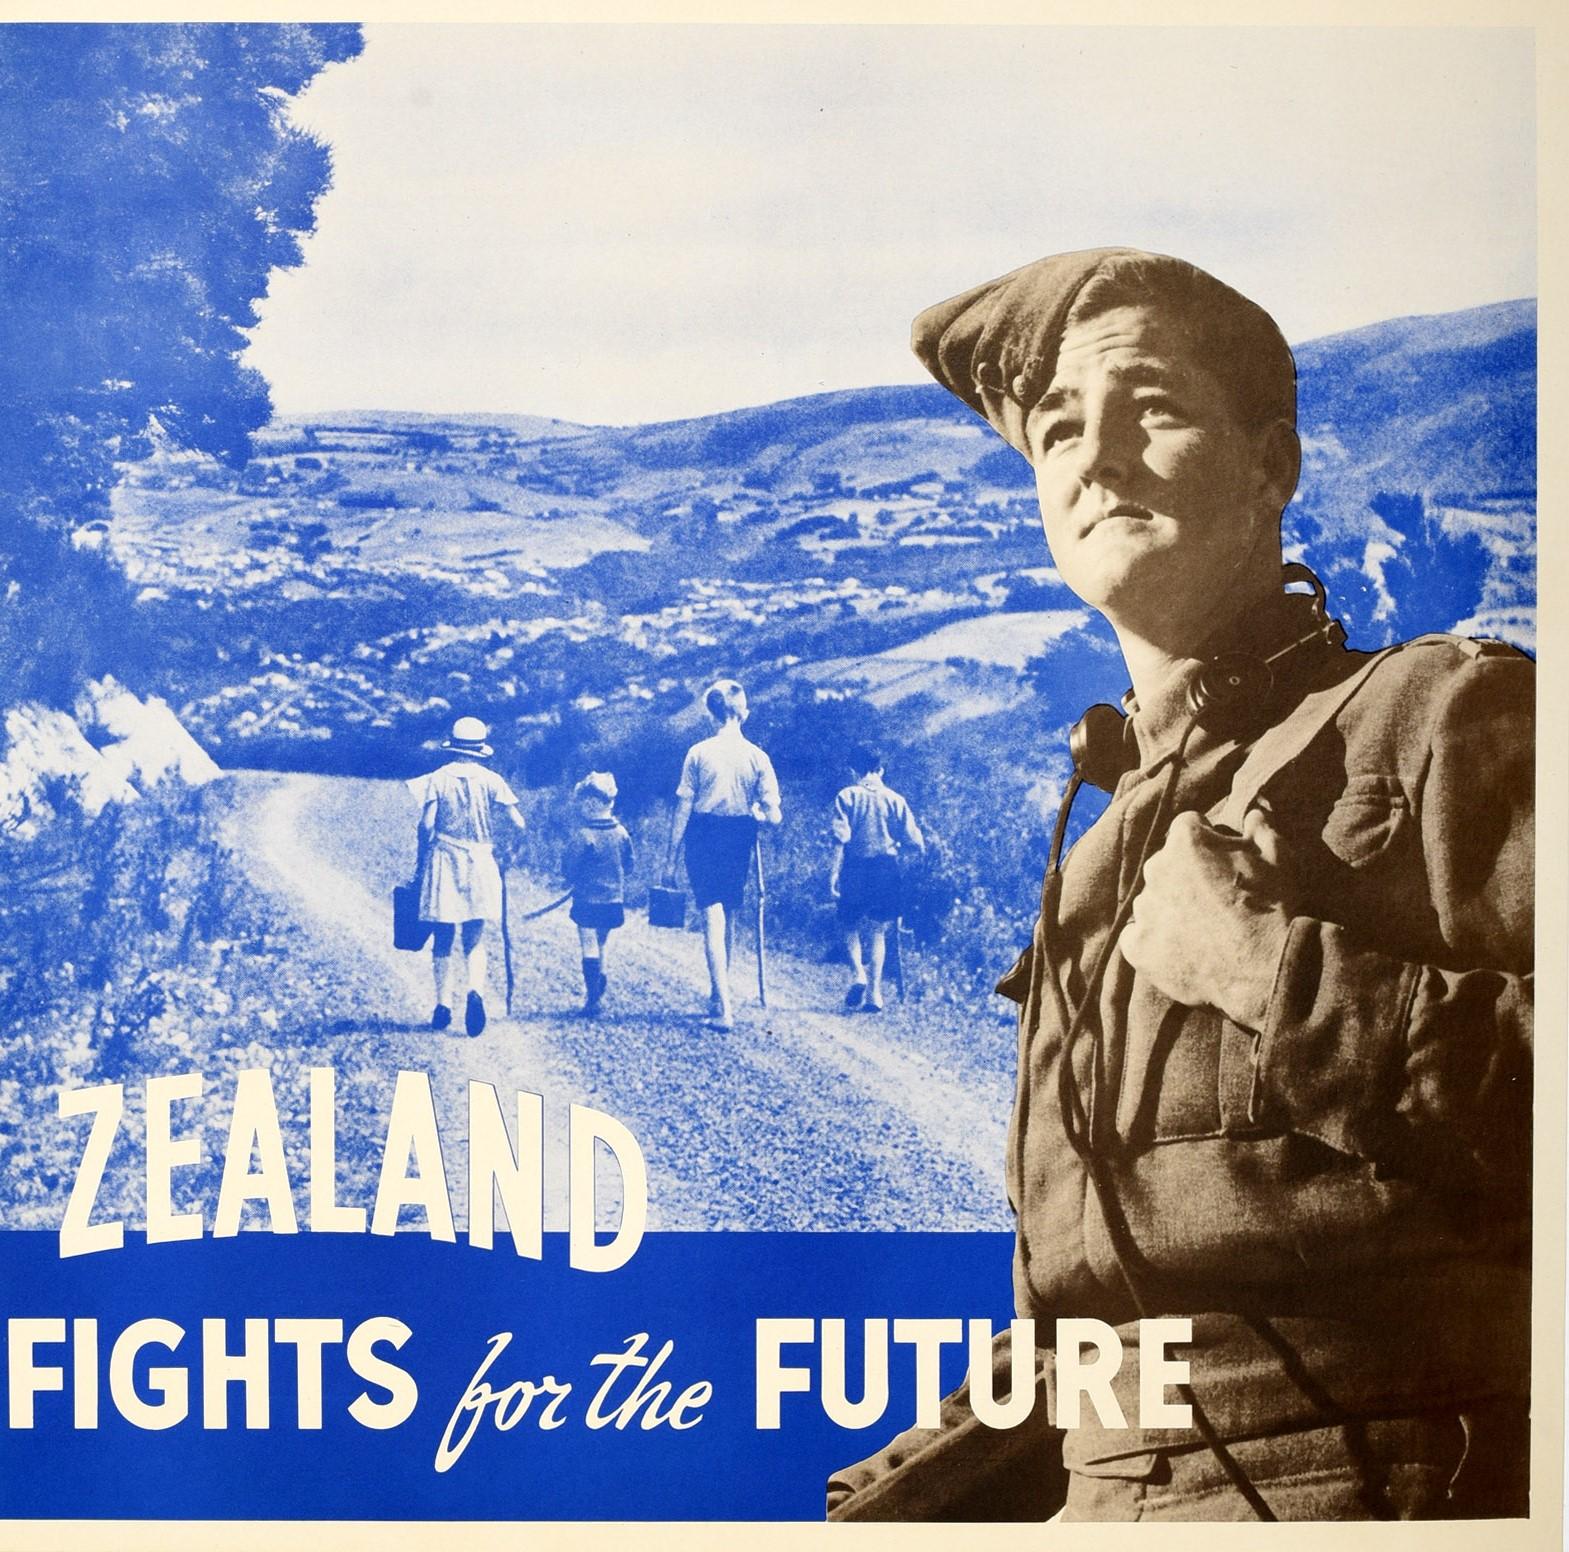 Original Vintage WWII Poster New Zealand Fights For The Future Soldier Children - Blue Print by Unknown